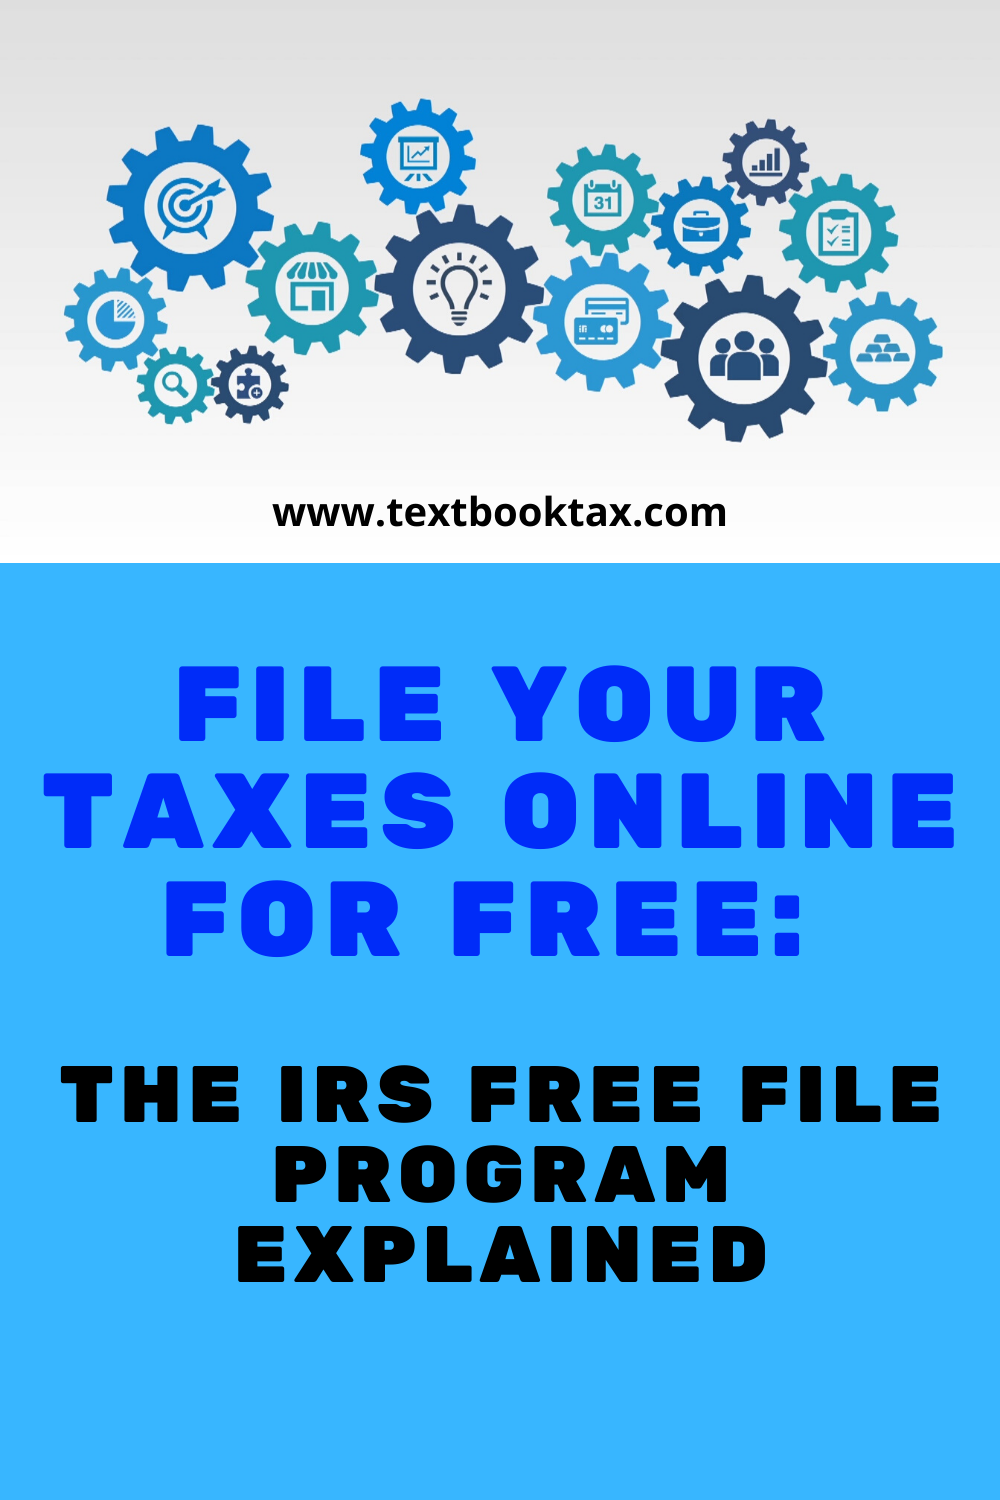 file-your-taxes-online-for-free-the-irs-free-file-program-explained